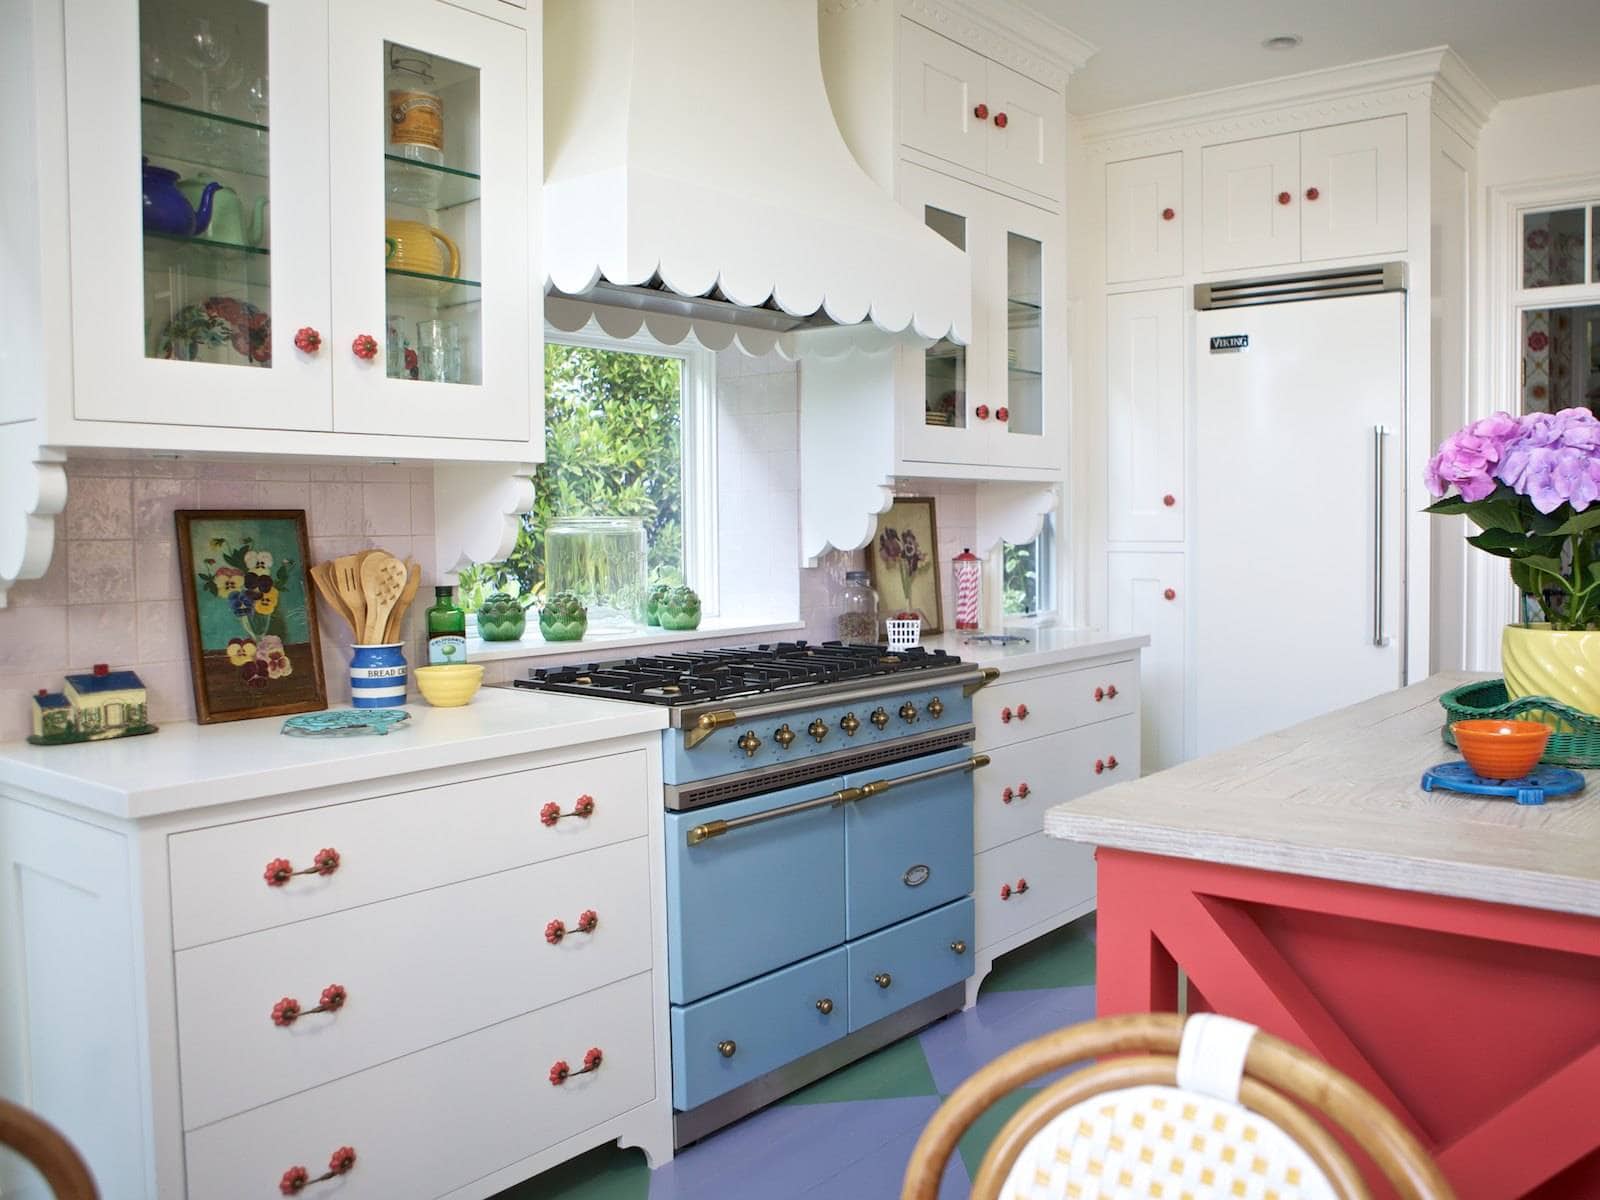 Room in beach english cottage style featuring kitchen with blue range